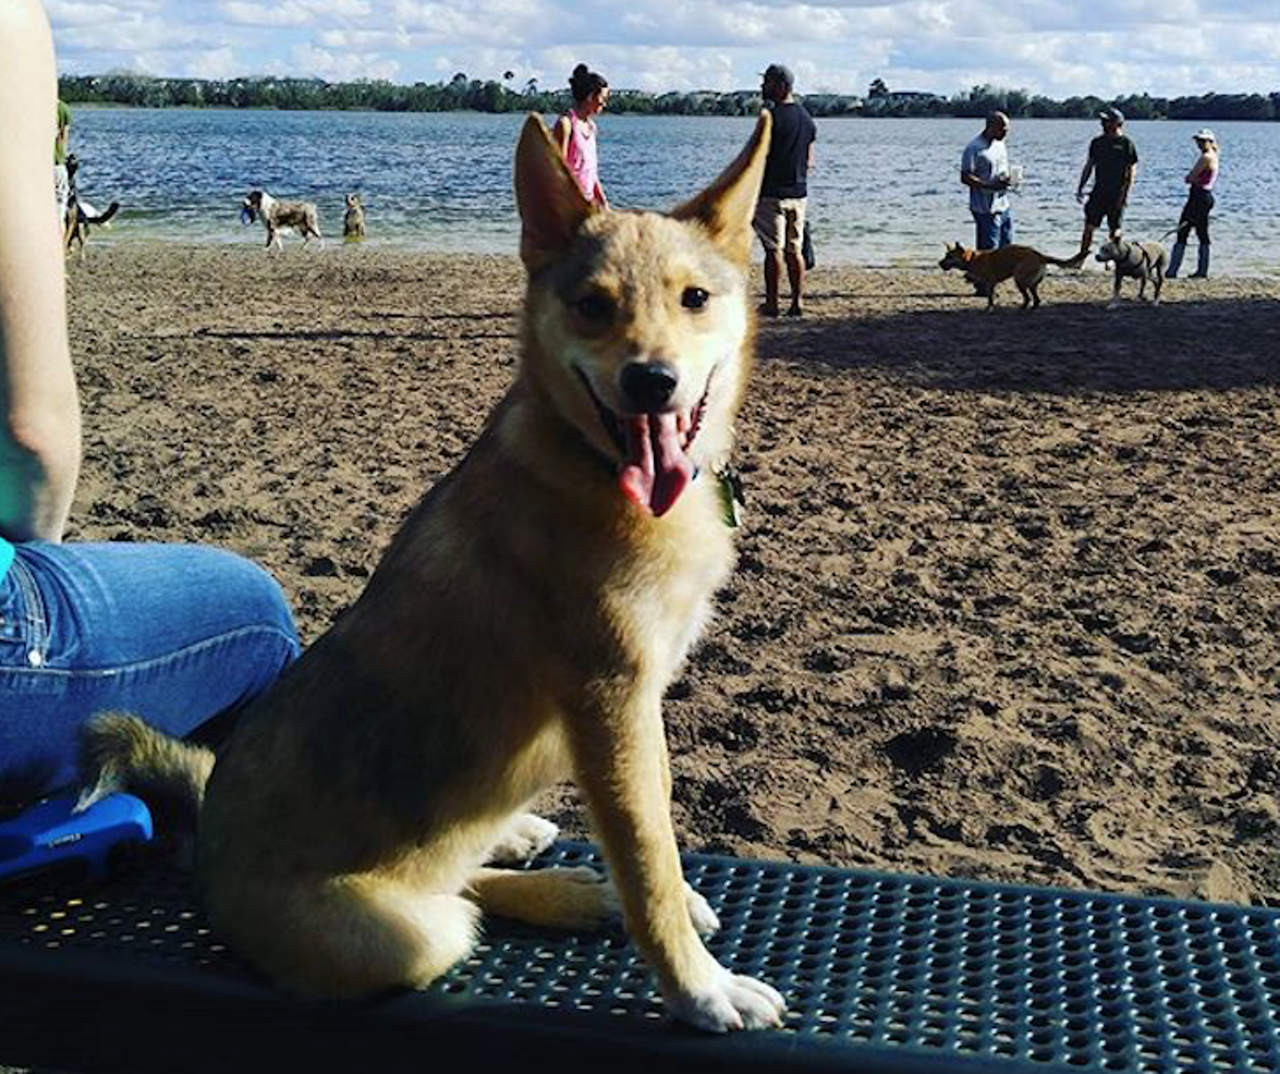 Lake Baldwin Park
2000 S. Lakemont Ave., Winter Park, 
This dog-friendly corner of Orlando has extensive areas for your dog to run, play and swim. The beach is the perfect place for the pooch in your life to cool down after some fun in the sun. Plus, they have dog showers! 
Photo via _beingzeus/Instagram